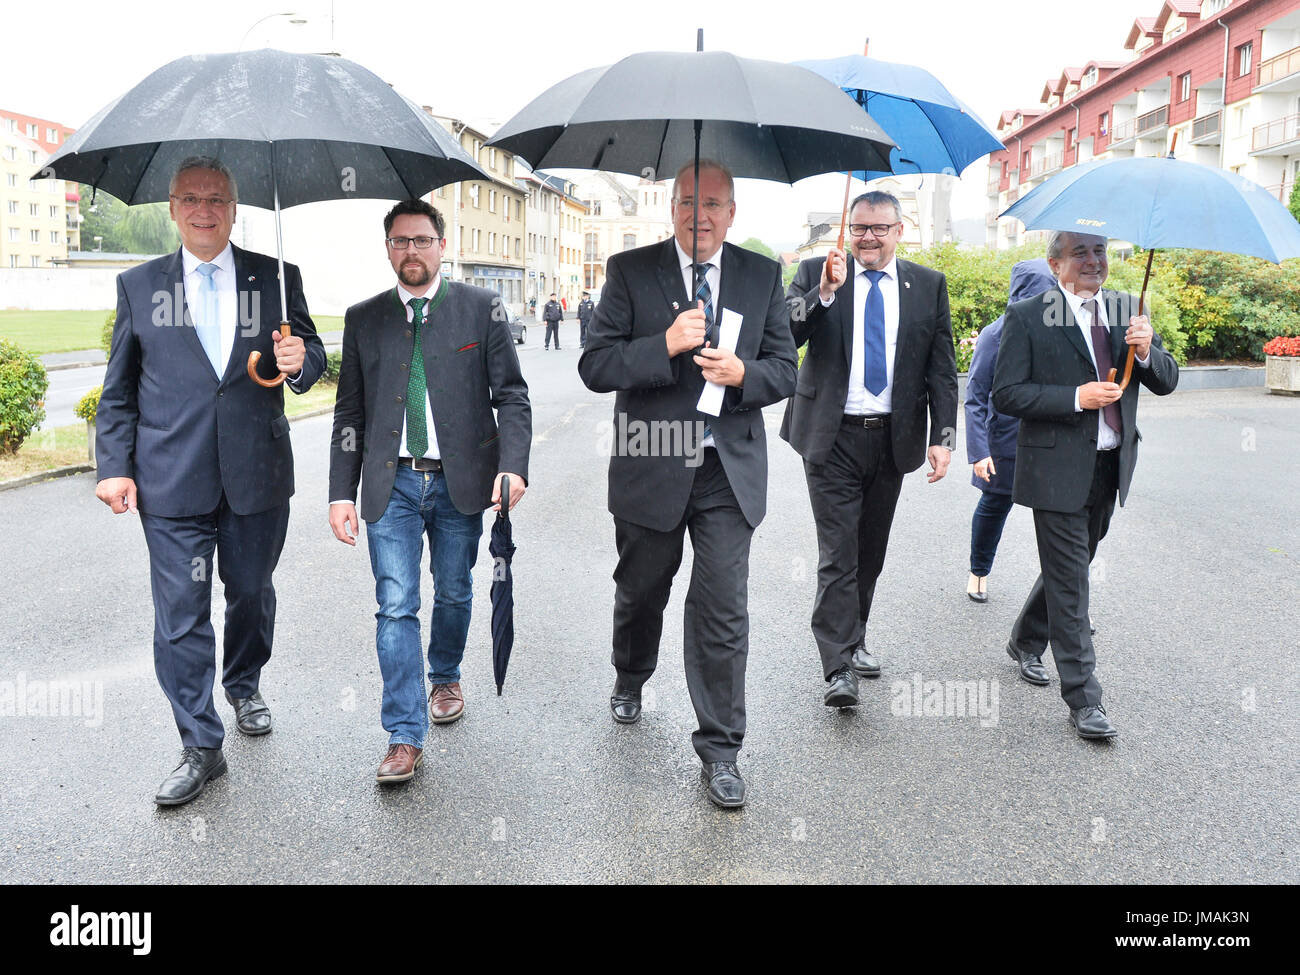 Nyrsko, Czech Republic. 26th July, 2017. Nyrsko mayor Miroslav Rubas, right, welcomes Czech Minister of Transport Dan Tok, second from right, Bavaria's Interior Minister Joachim Herrmann, left, and Franz Loffler, centre, of Provincial council of Cham district during celebrations of anniversary of CR-Bavaria bus line launch, the cross-border bus line project, in Nyrsko, Czech Republic, on Wednesday, July 26, 2017. Credit: Miroslav Chaloupka/CTK Photo/Alamy Live News Stock Photo